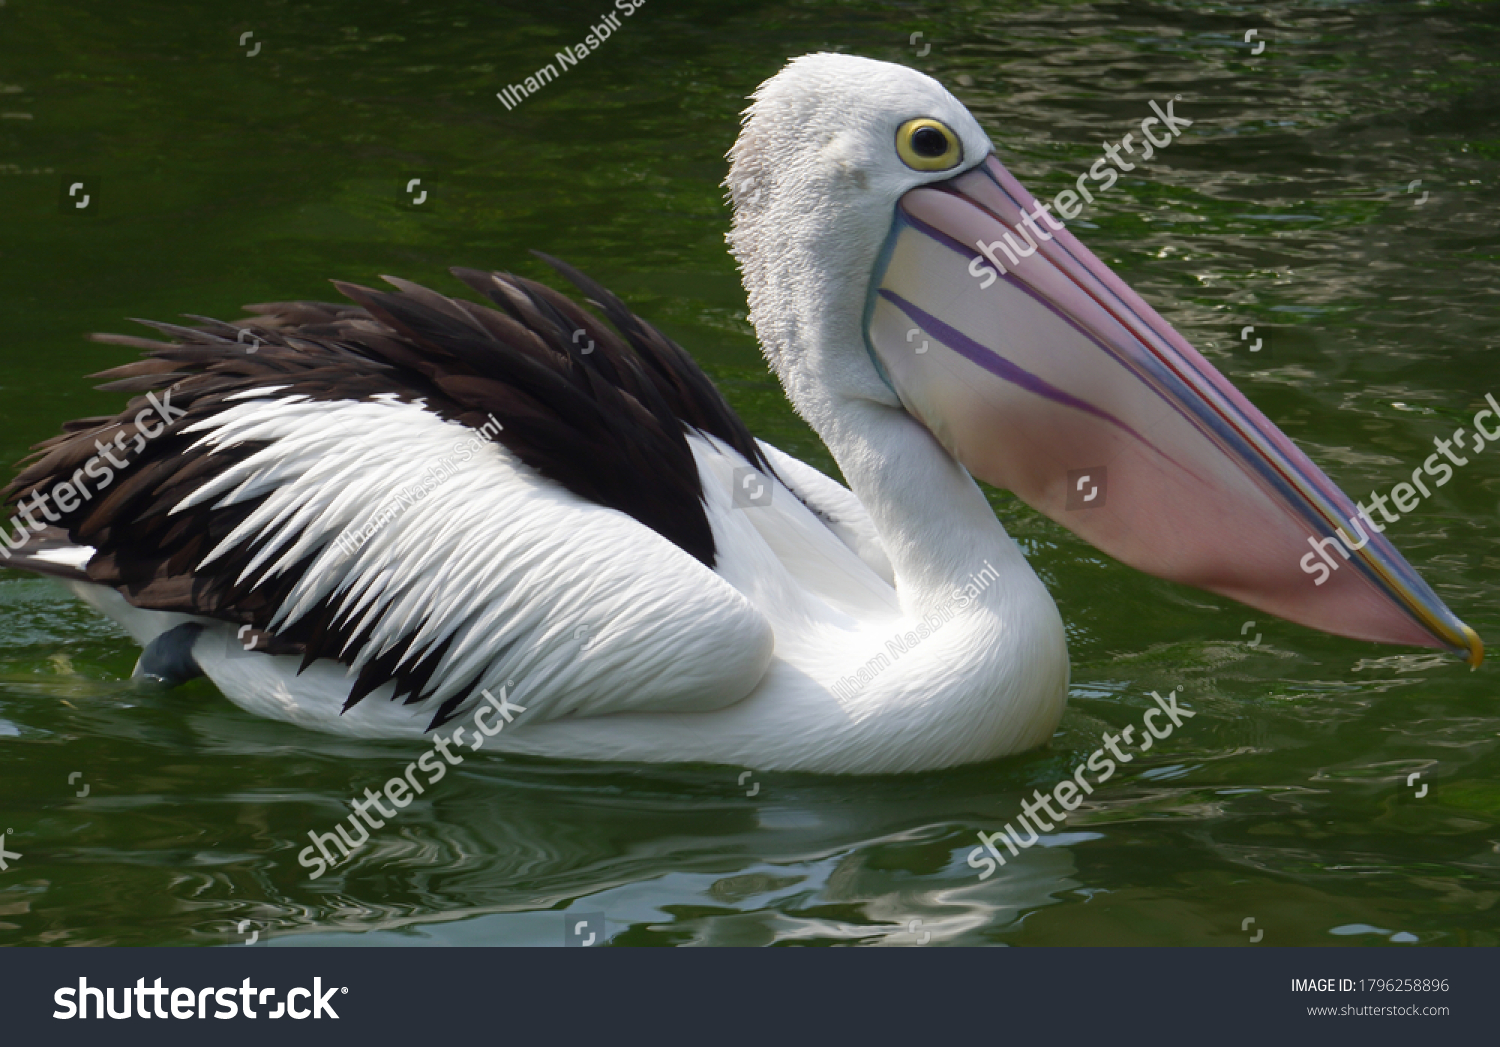 Pelicans (Pelecanus onocrotalus) are a genus of large water birds that makes up the family Pelecanidae. They are characterised by a long beak and a large throat pouch used for catching prey. #1796258896